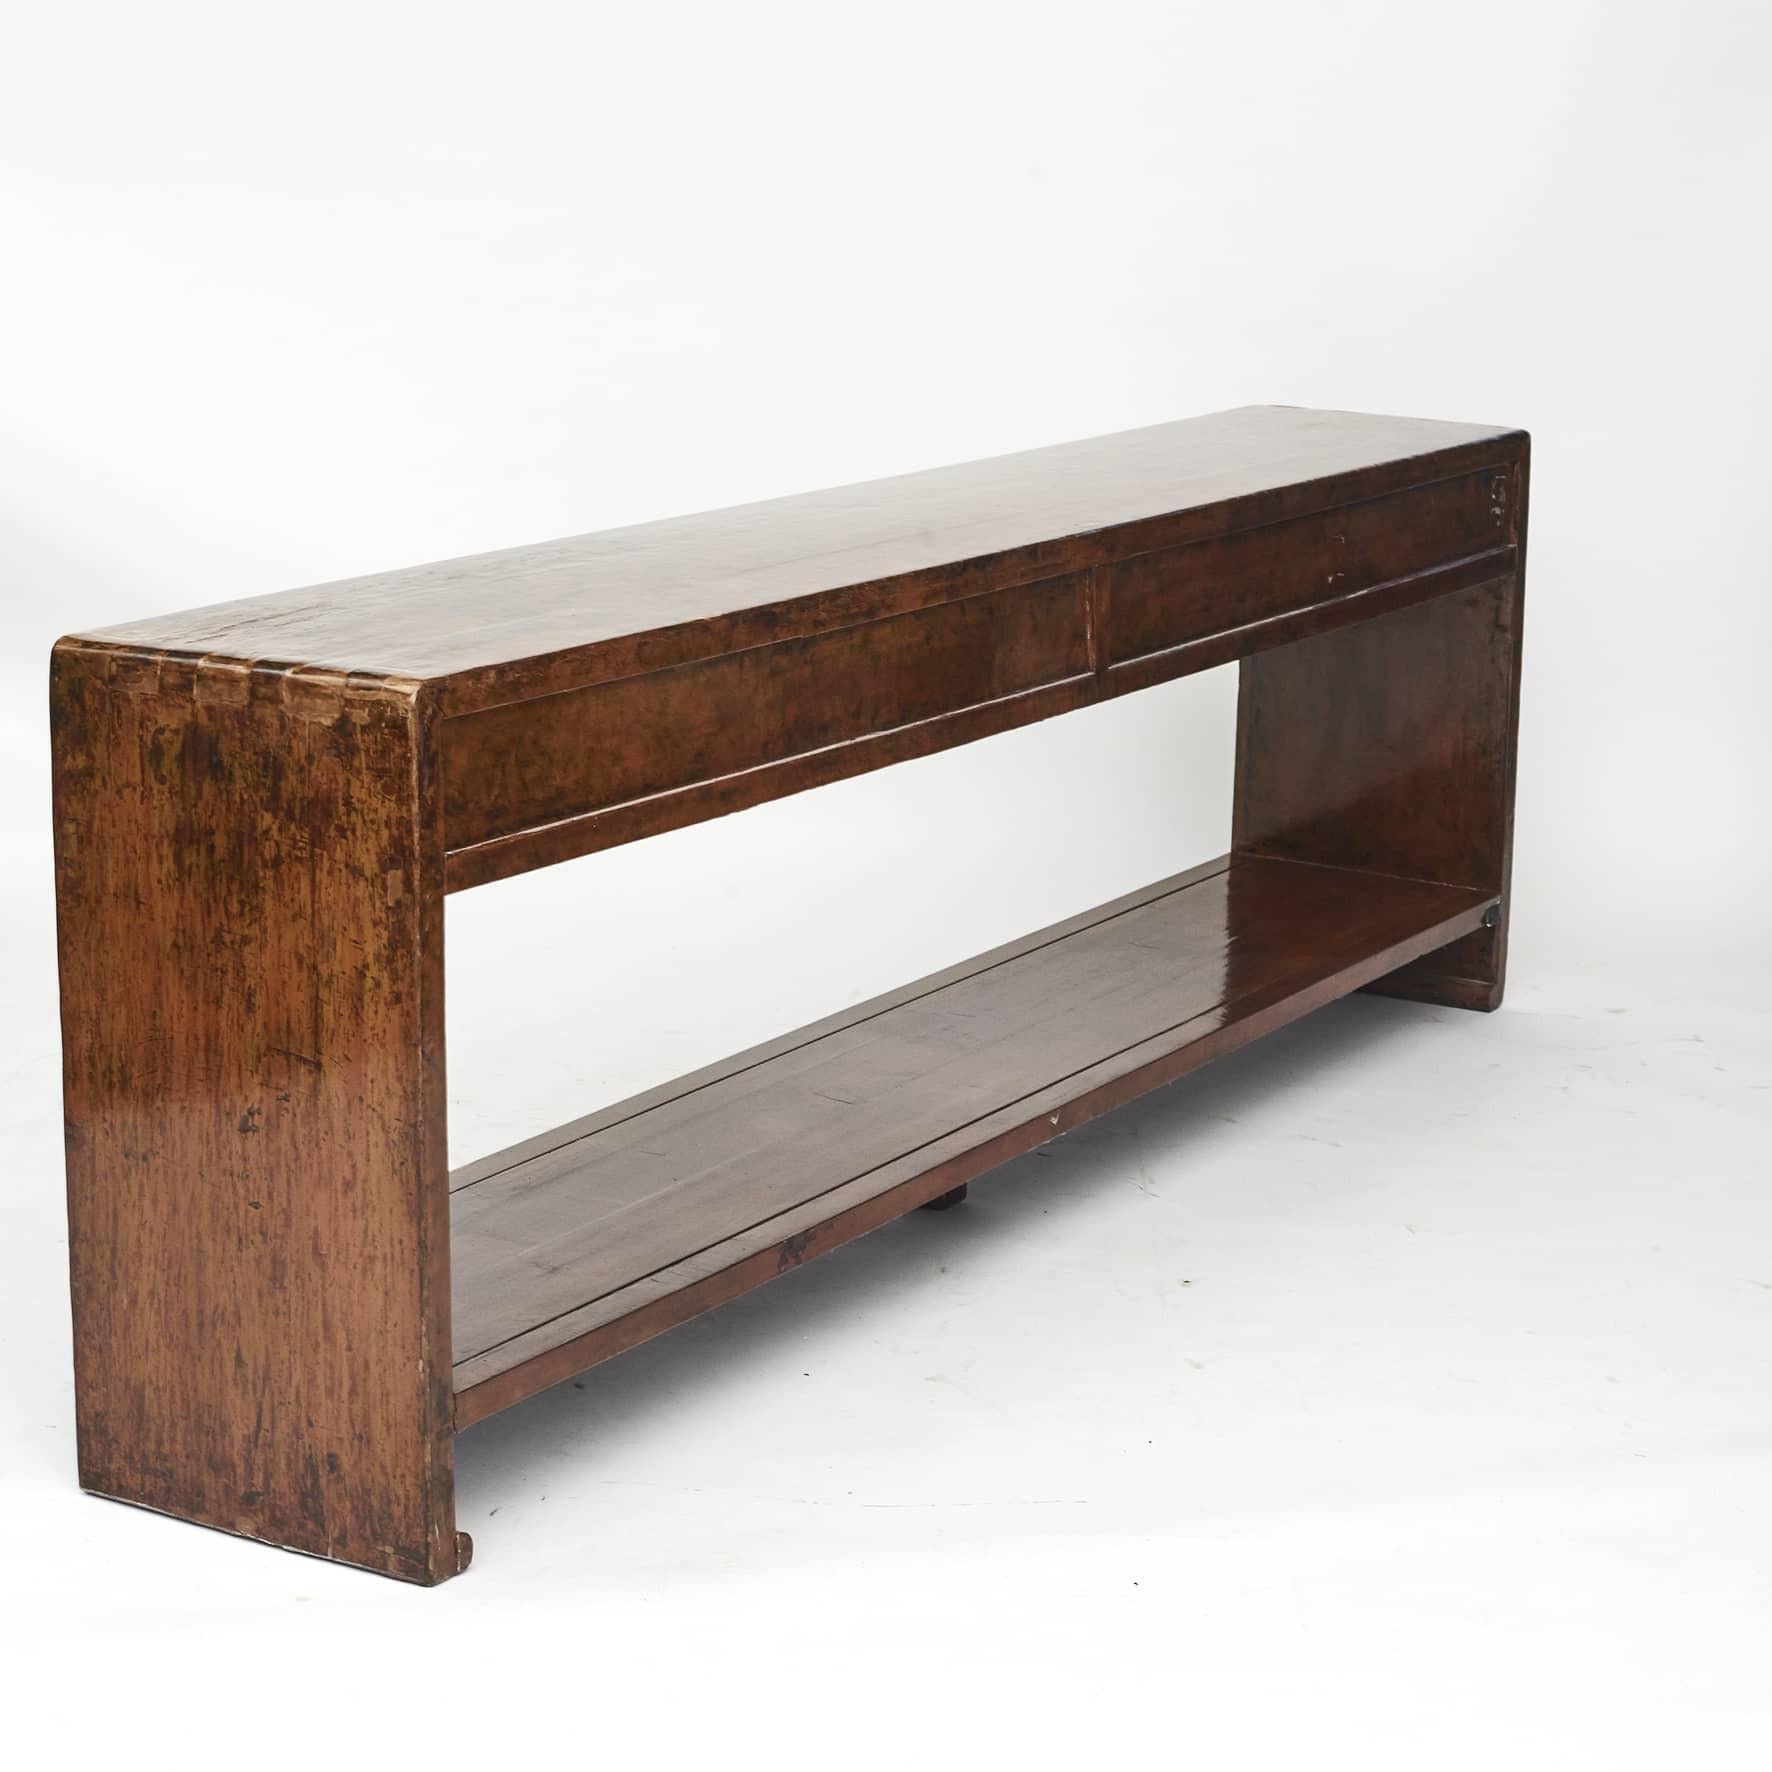 Decorative art deco console table (177 cm long).
Freestanding with 4 drawers and underlying shelf.
Lacquer with brownish cinnamon shades beautiful patina.
China 1910 - 1915.